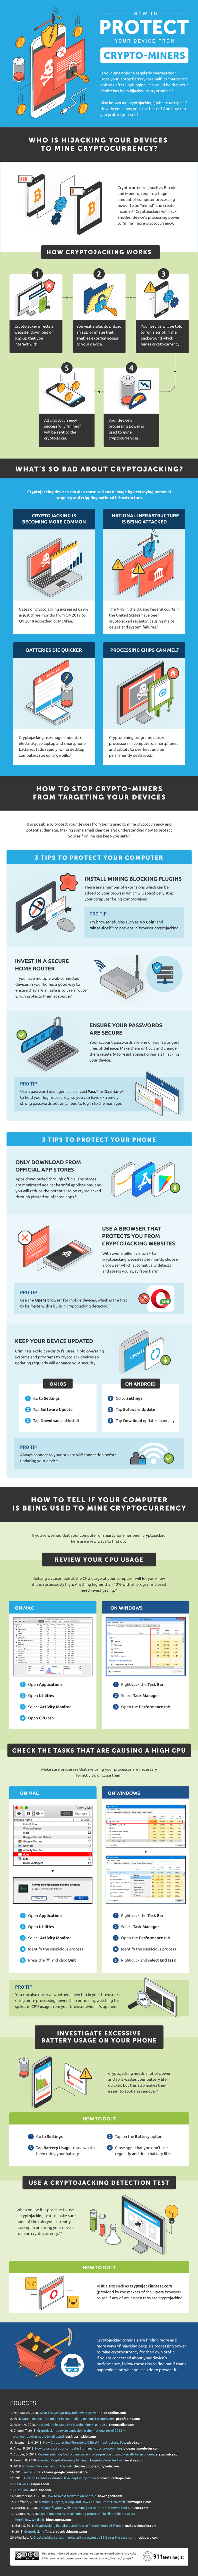 How to protect your devices from crypto-miners - infographic